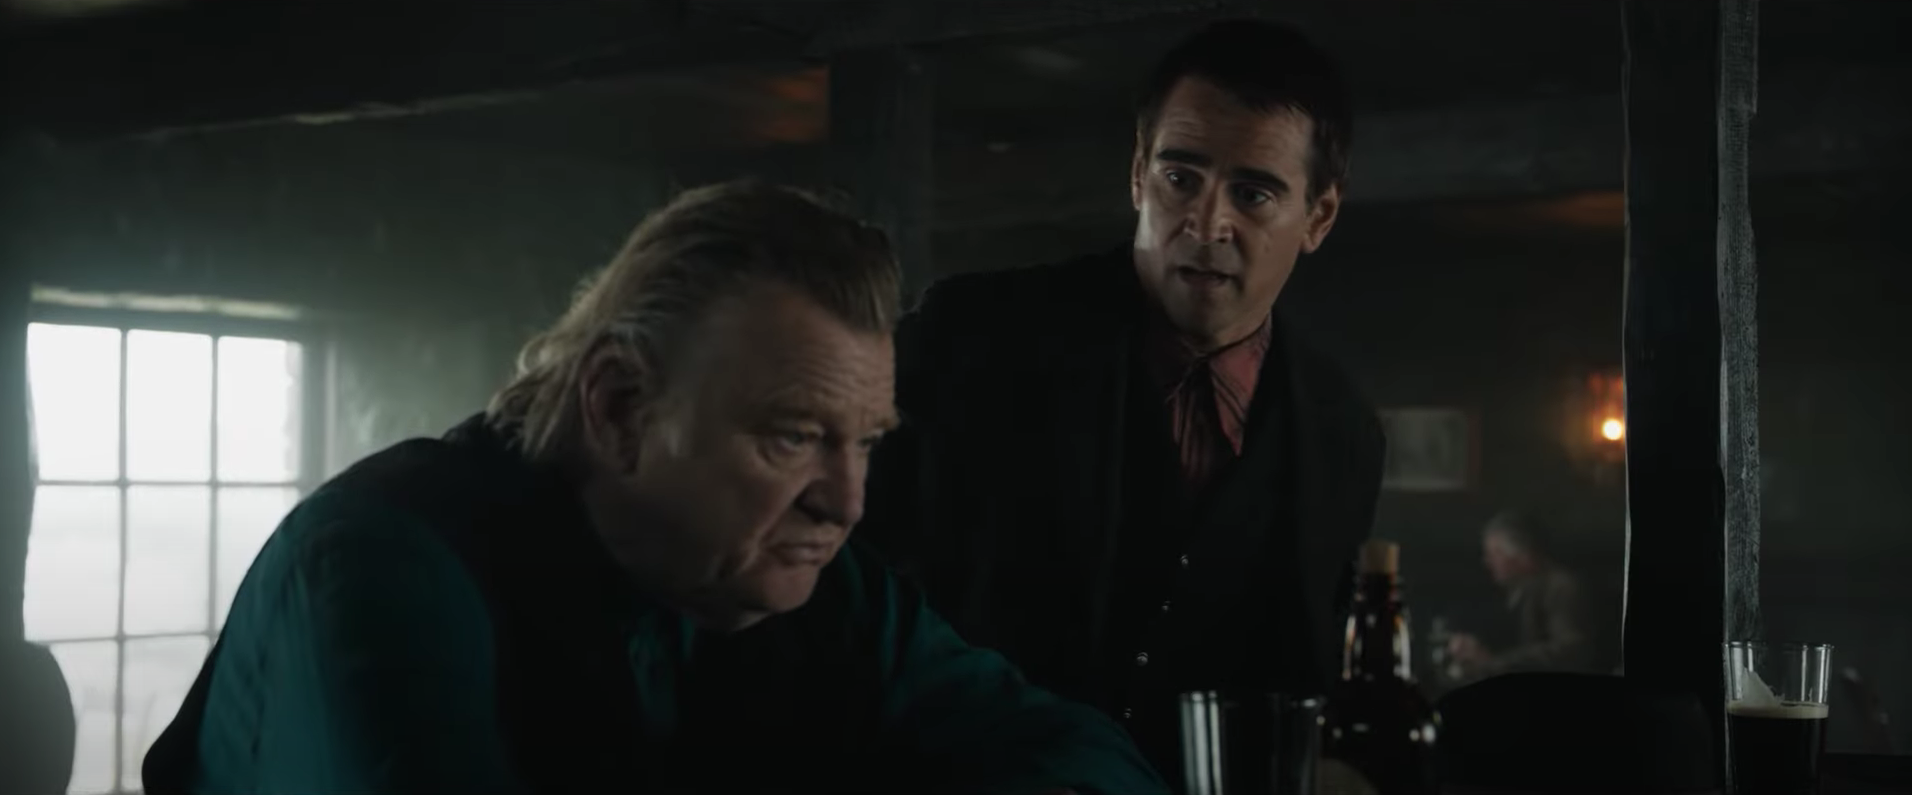 Colin Farrell and Brendan Gleeson in 'Banshees of Inisherin' 